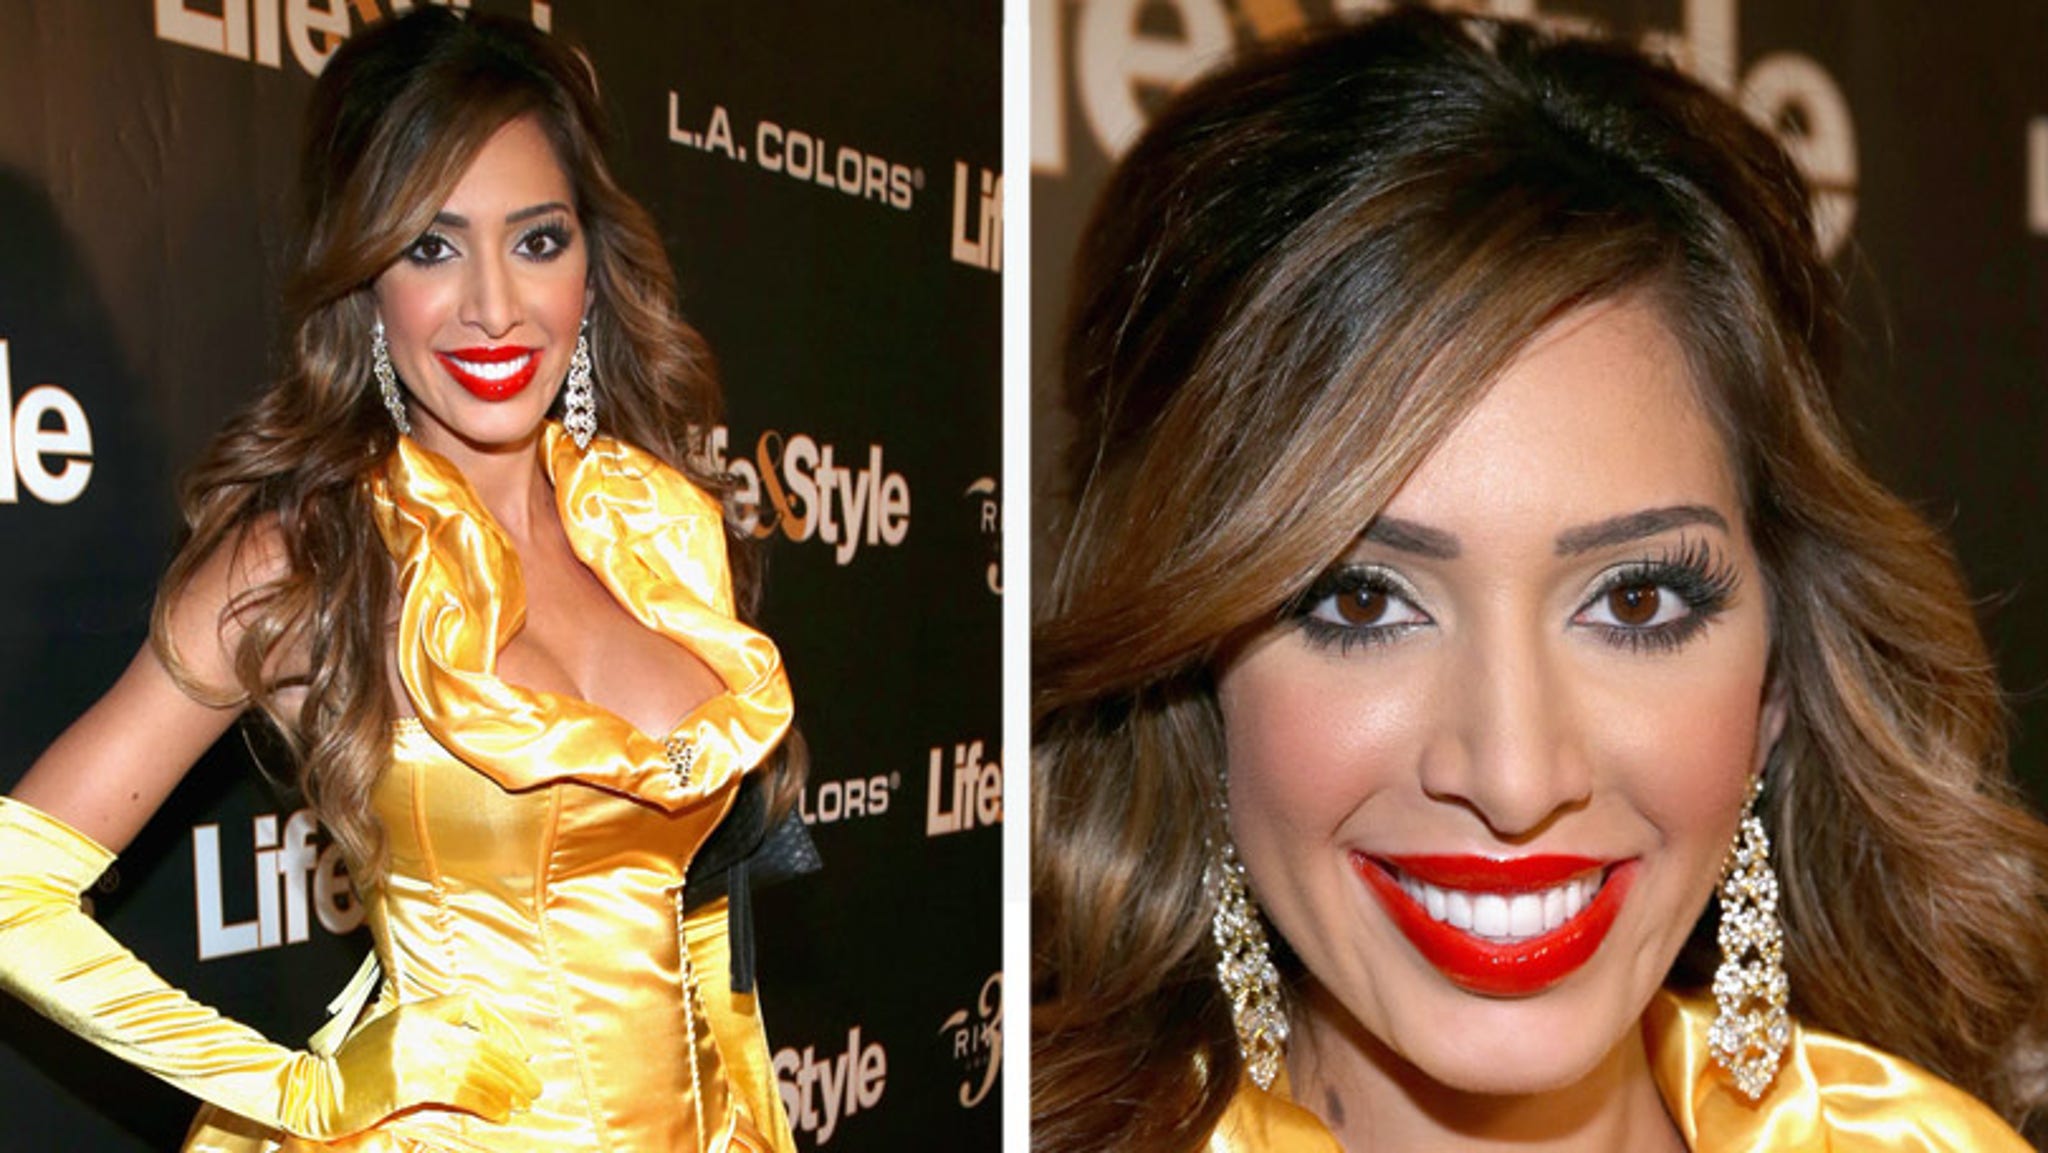 Farrah Abraham Shows Off Third Boob Job with Very Revealing Belle Costume.